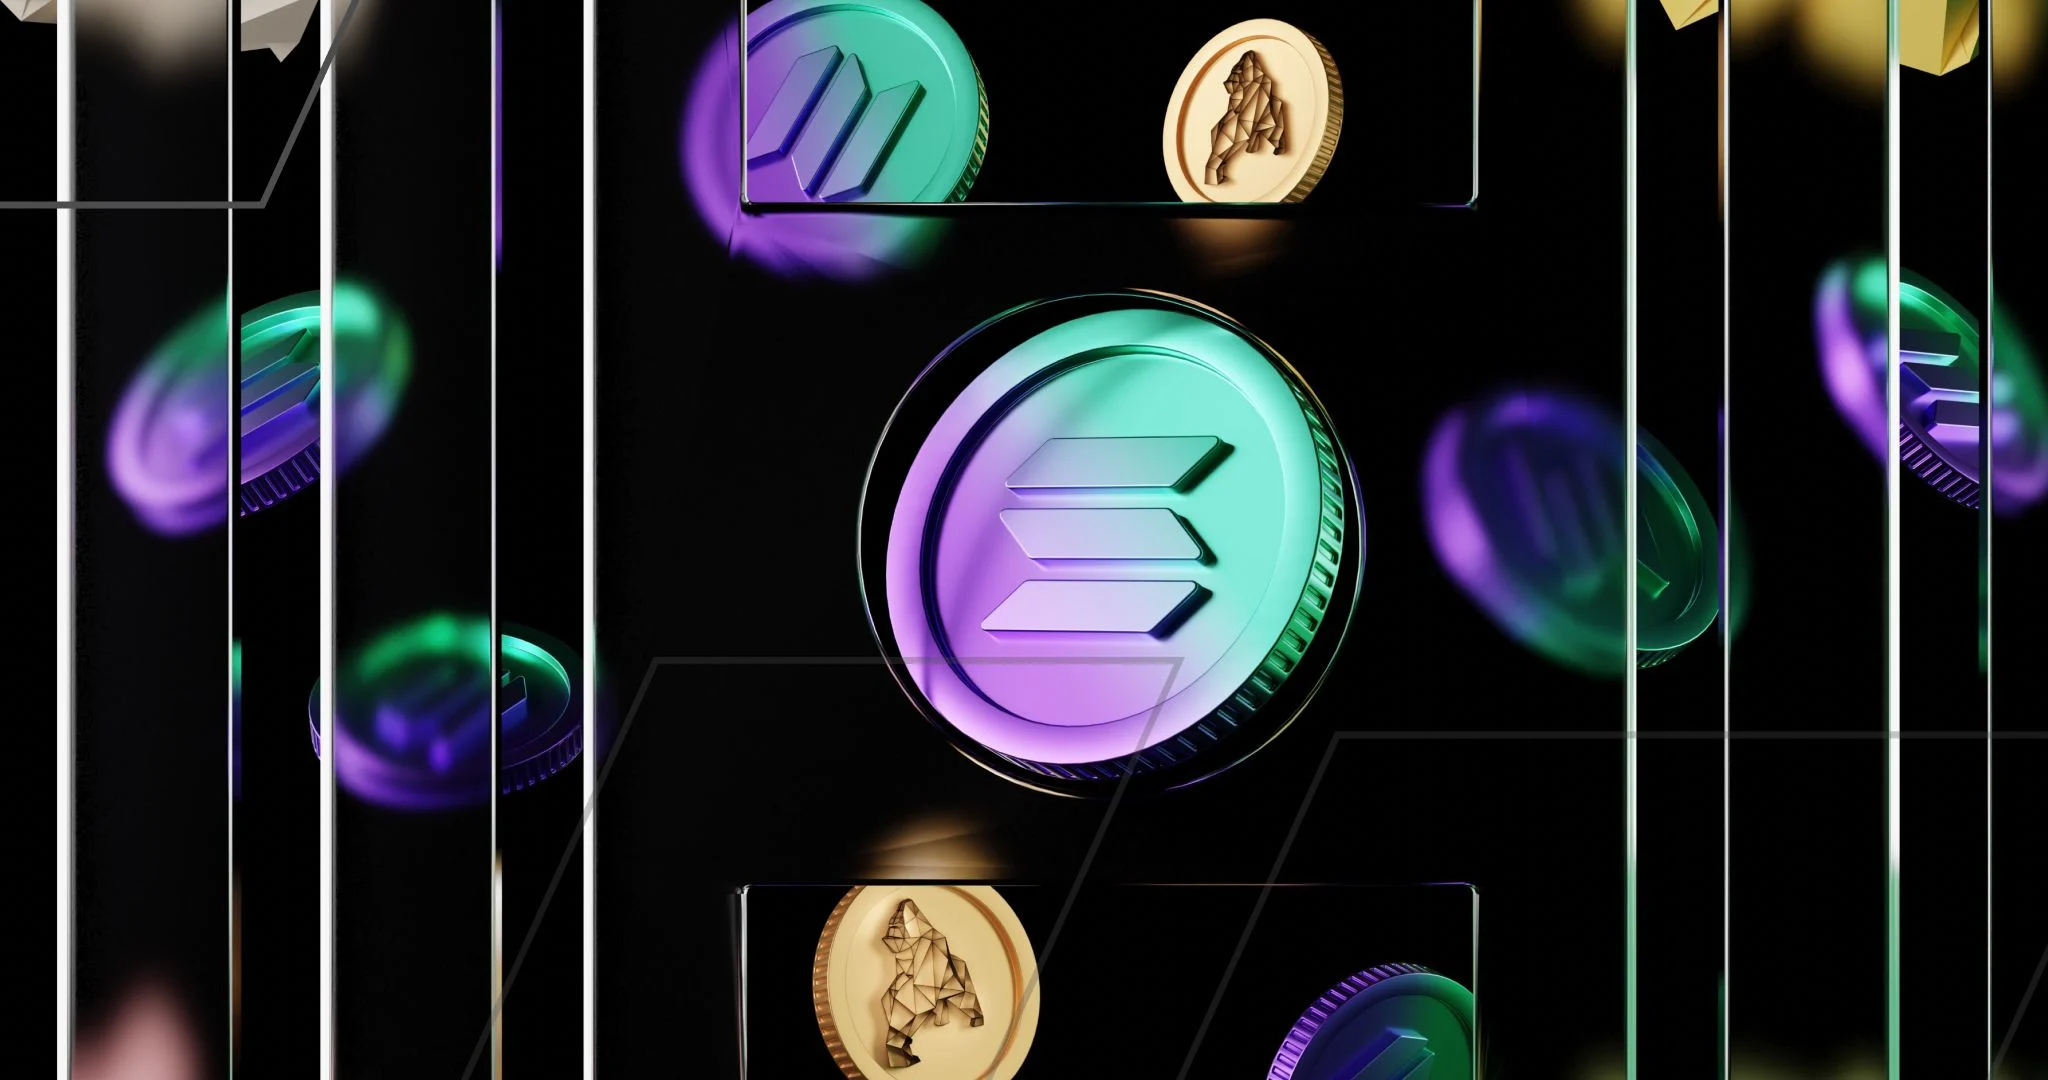 Solana coins floating in a digital background. Source: NFT.com